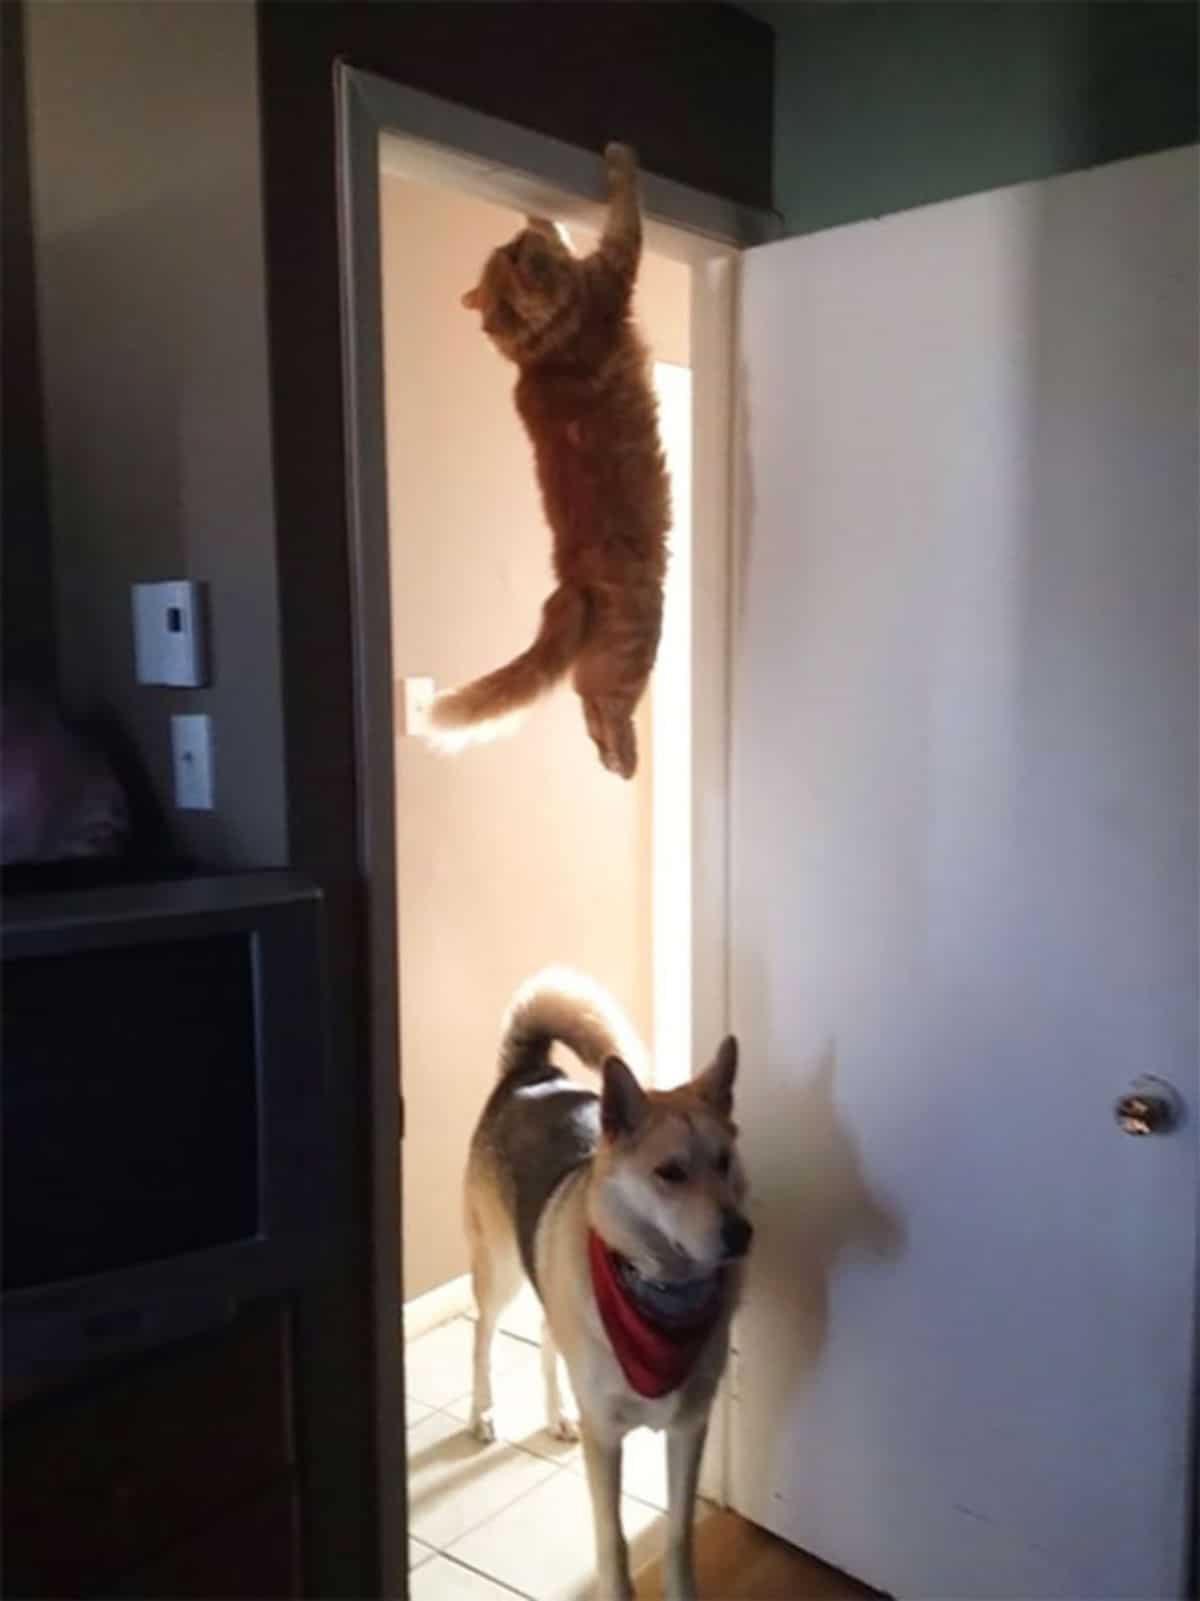 orange cat hanging from the top of the doorjamb with a black and brown dog in a red bandana standing under the cat